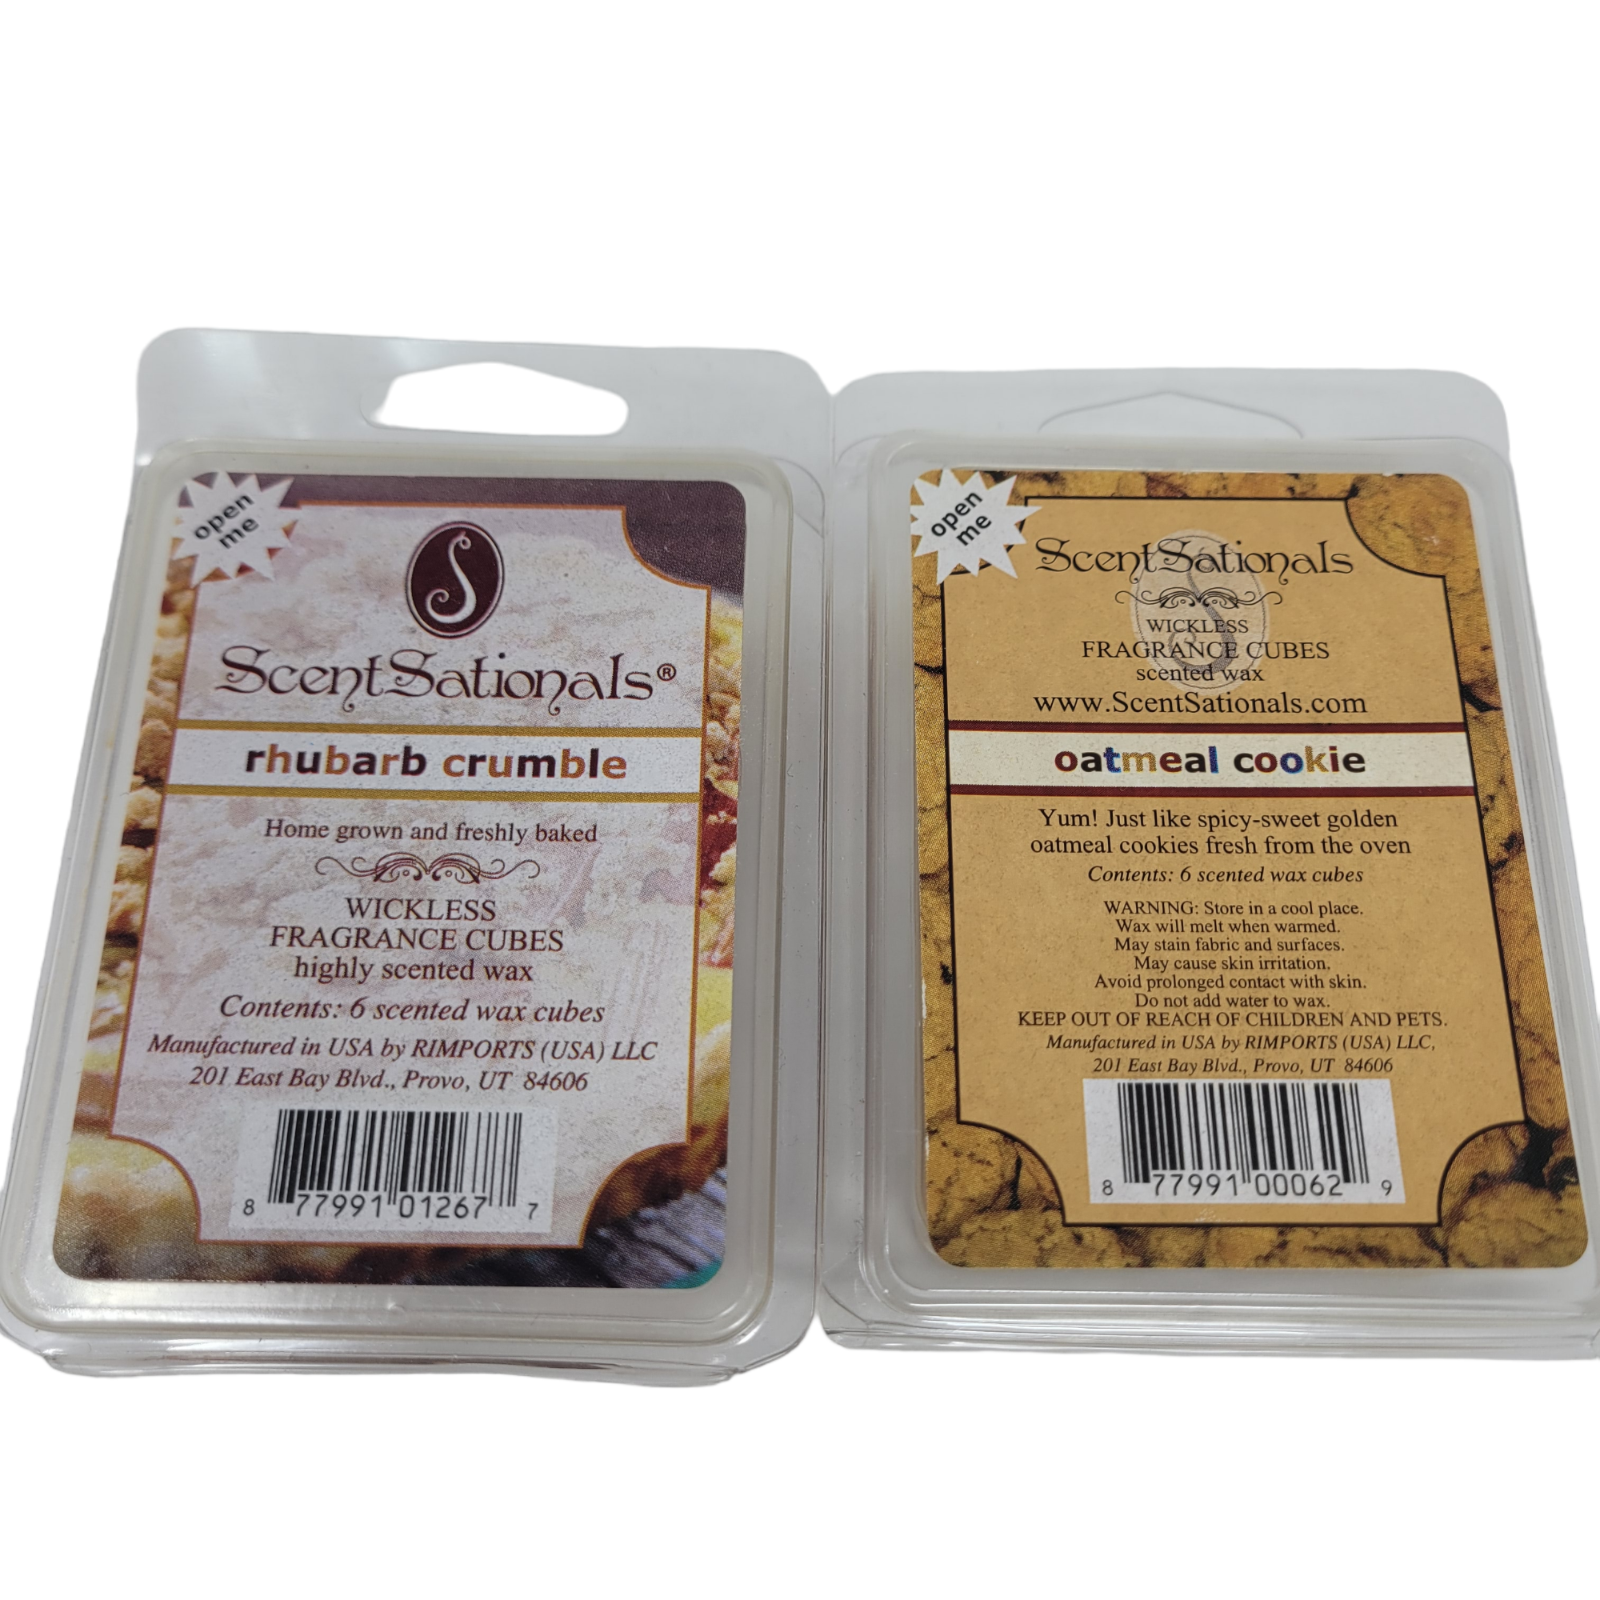 2 SCENTSATIONALS Rhubarb Crumble and Oatmeal Cookie WAX FRAGRANCE CUBES - $7.91